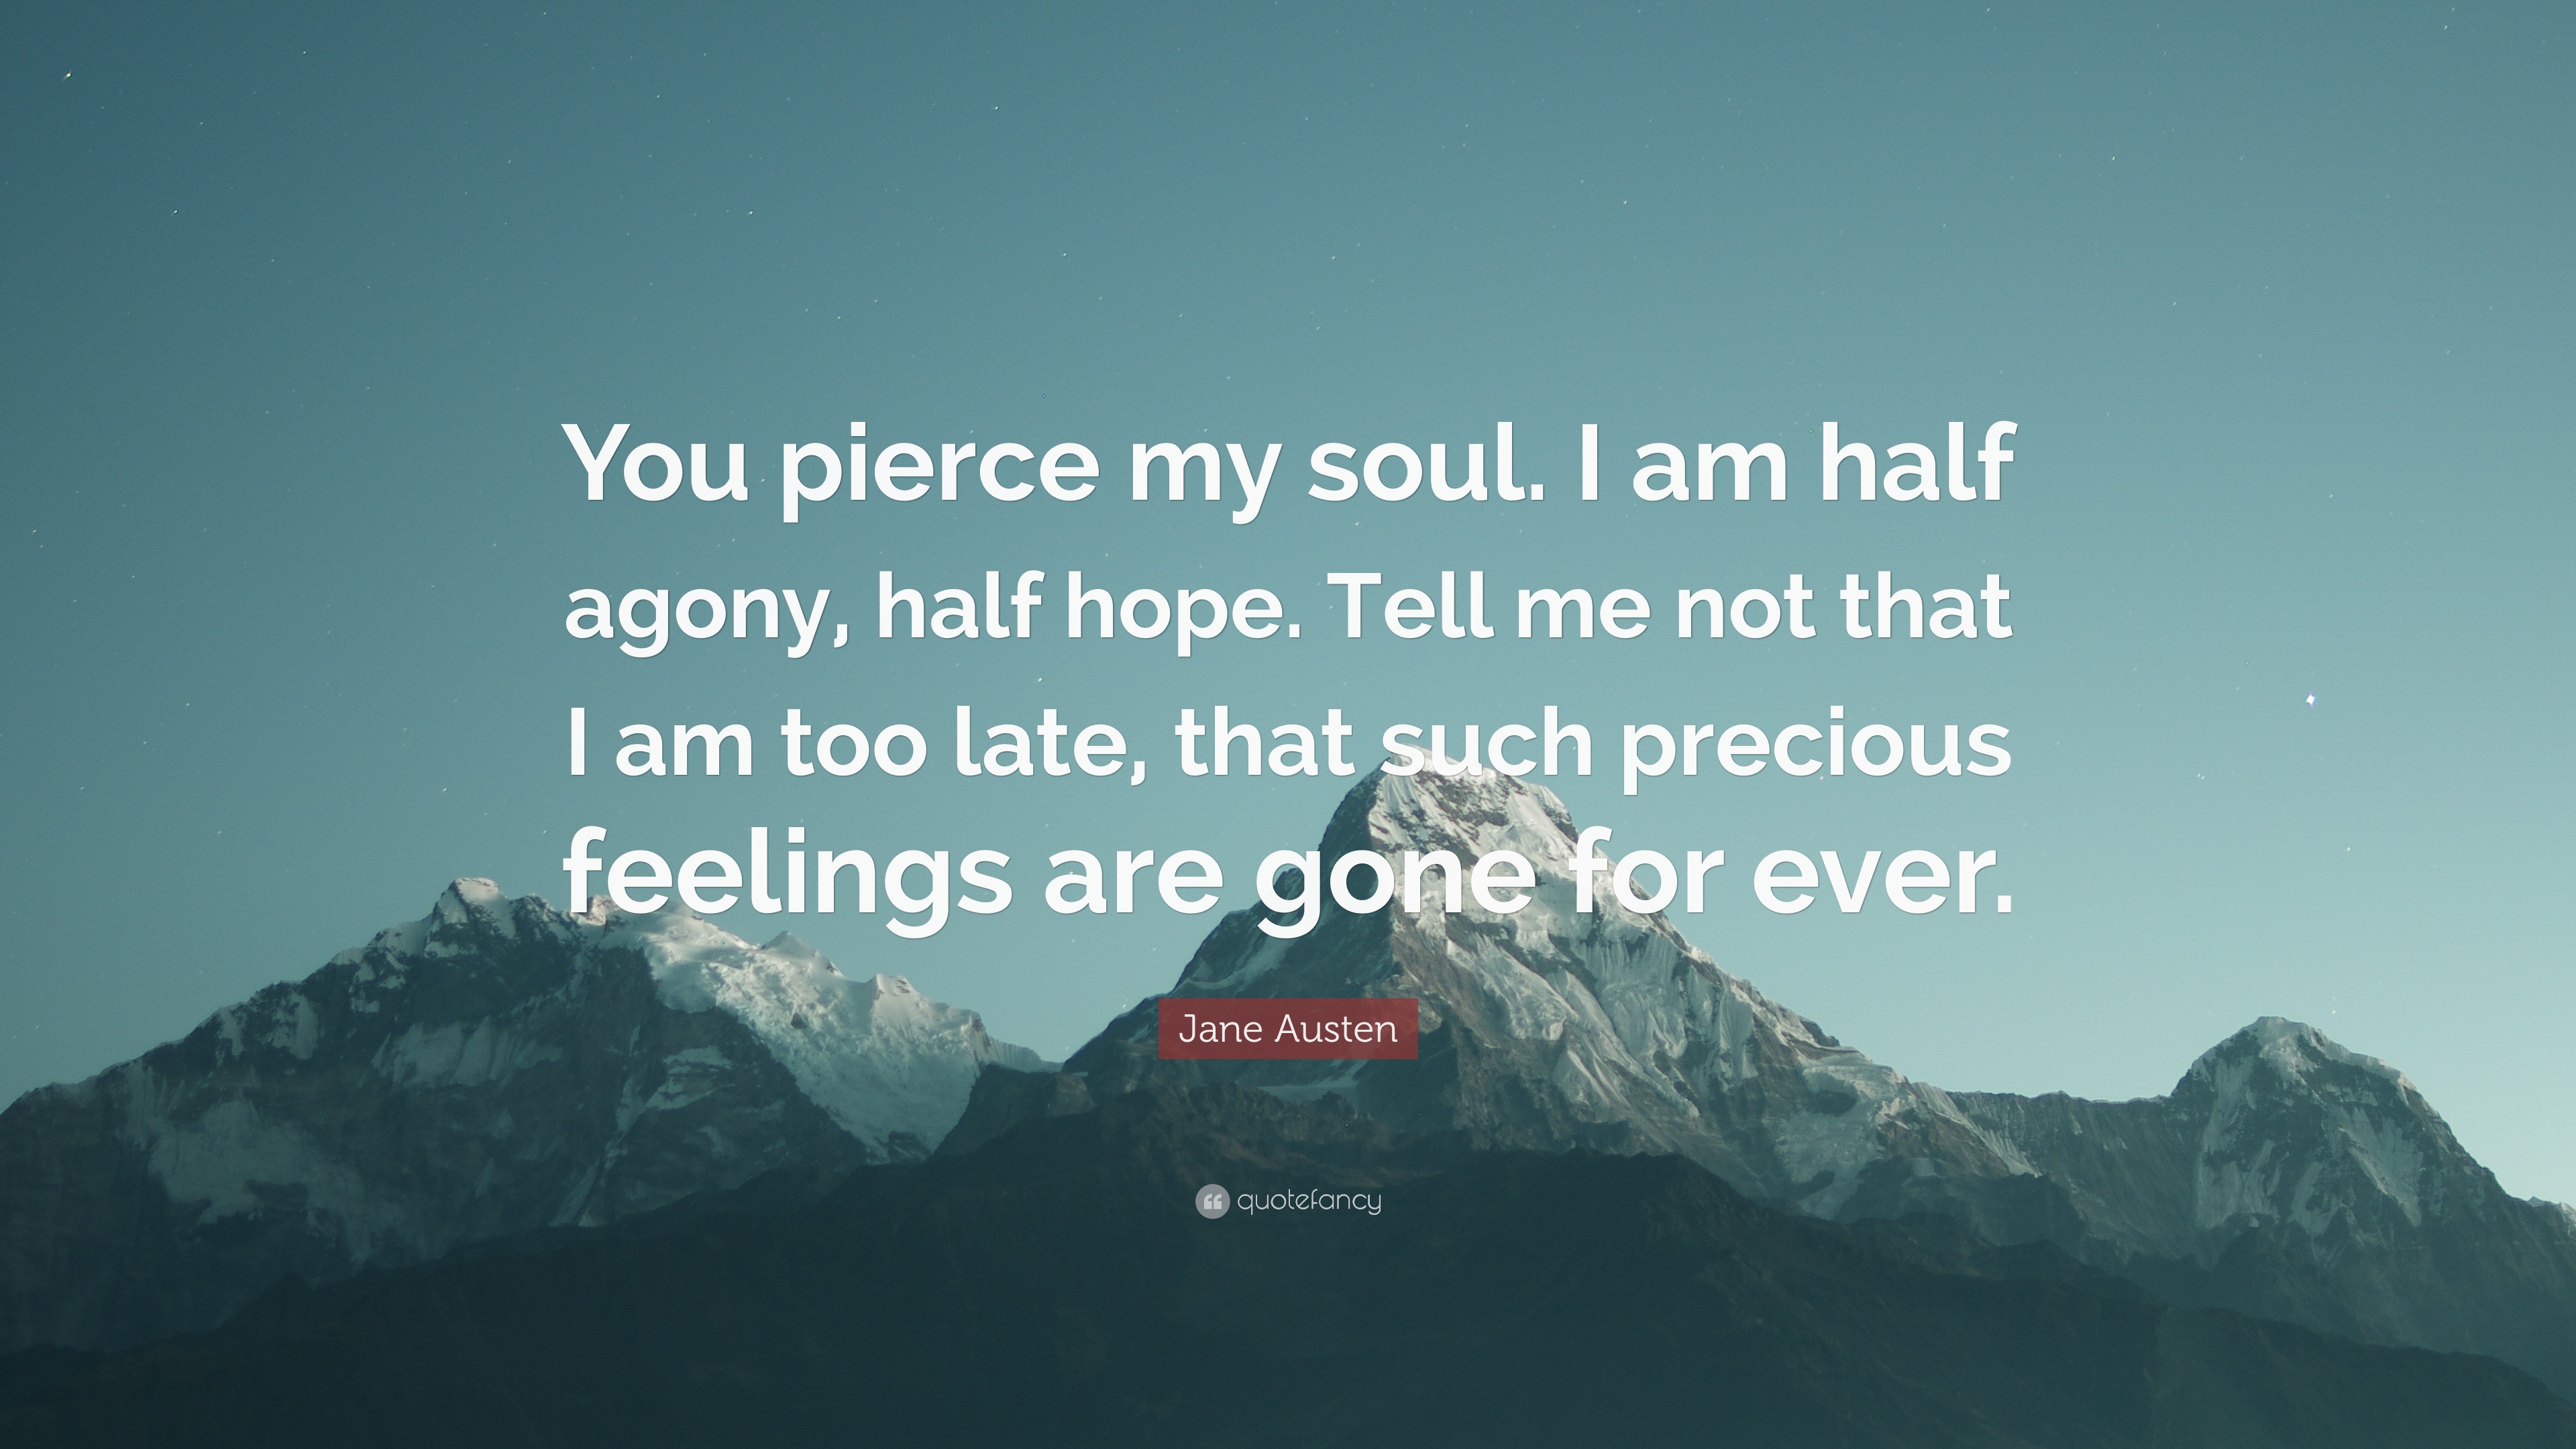 Jane Austen Quote: “You pierce my soul. I am half agony, half hope. Tell me  not that I am too late, that such precious feelings are gone for...”